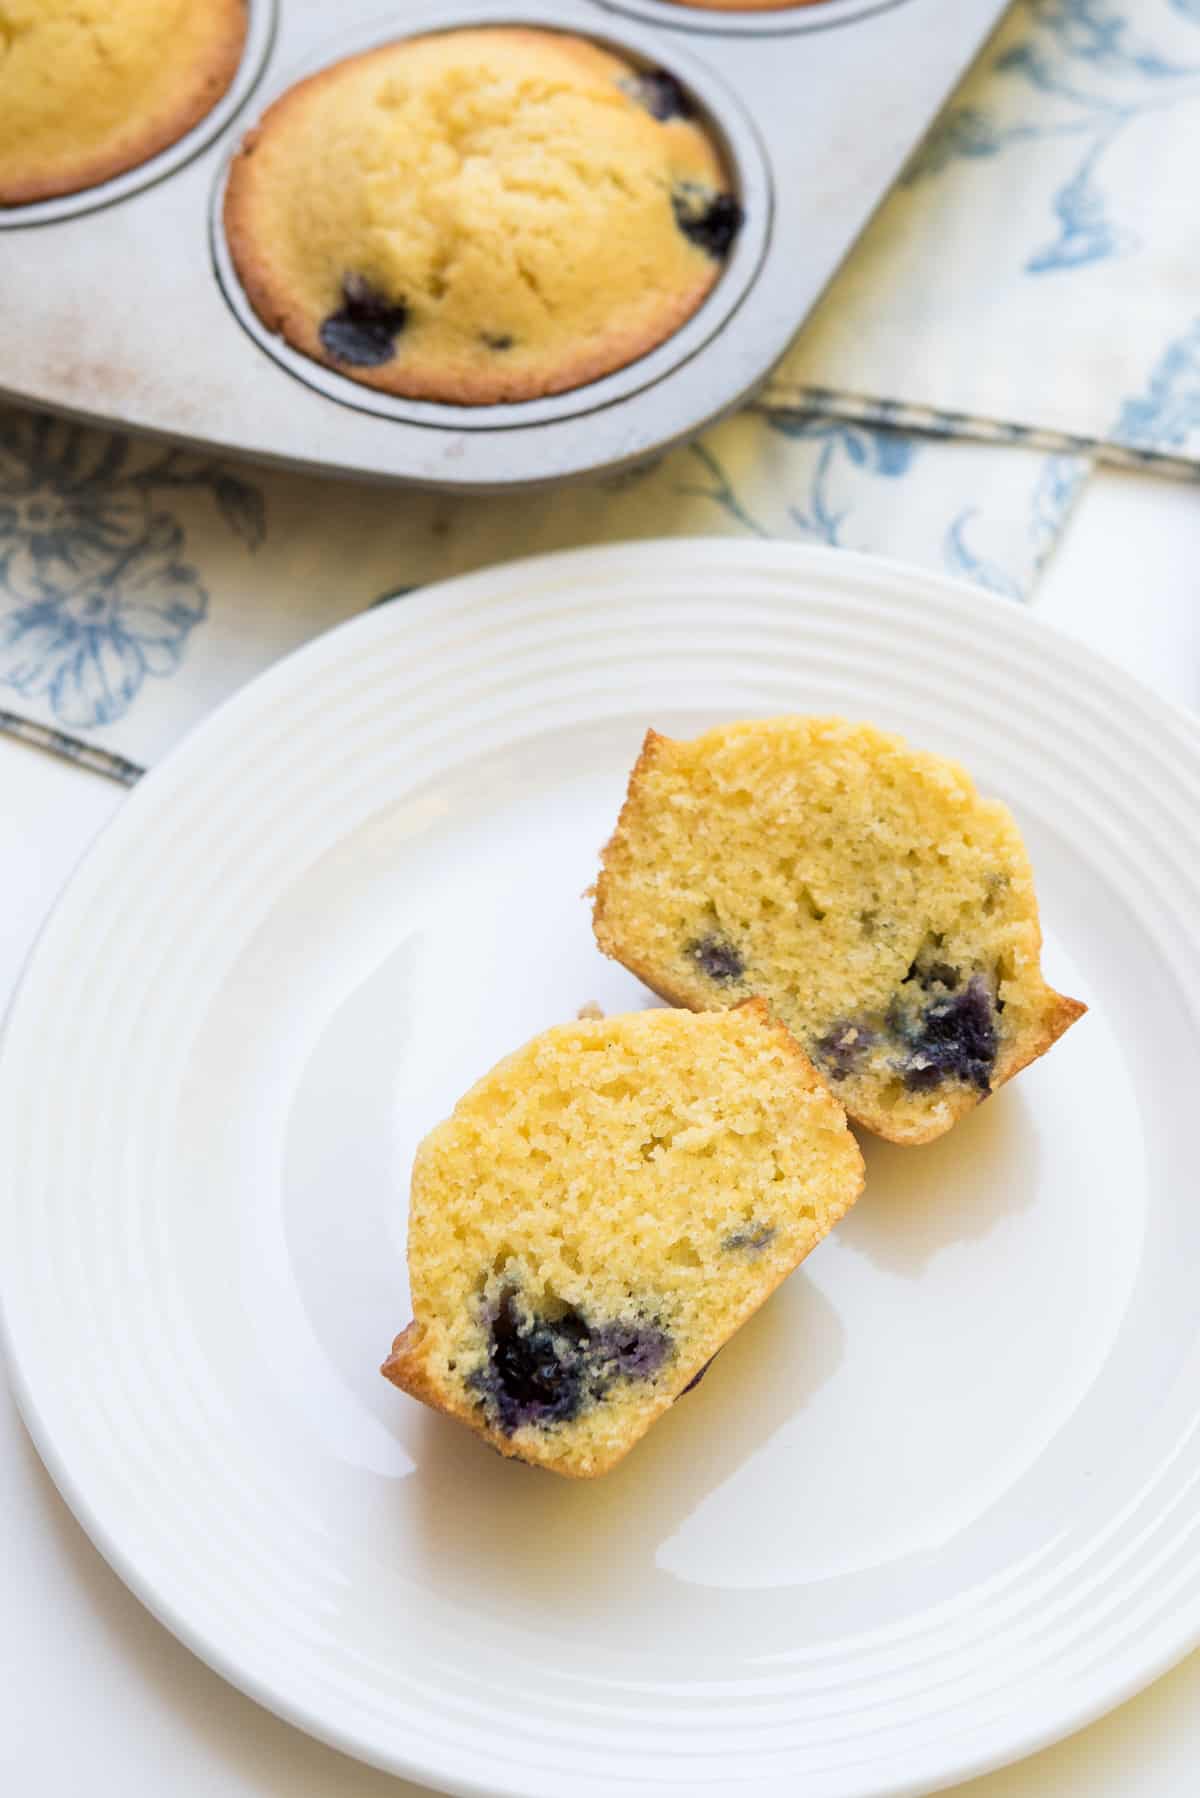 A blueberry cornmeal muffin sliced in half on a white plate next to a muffin tin.